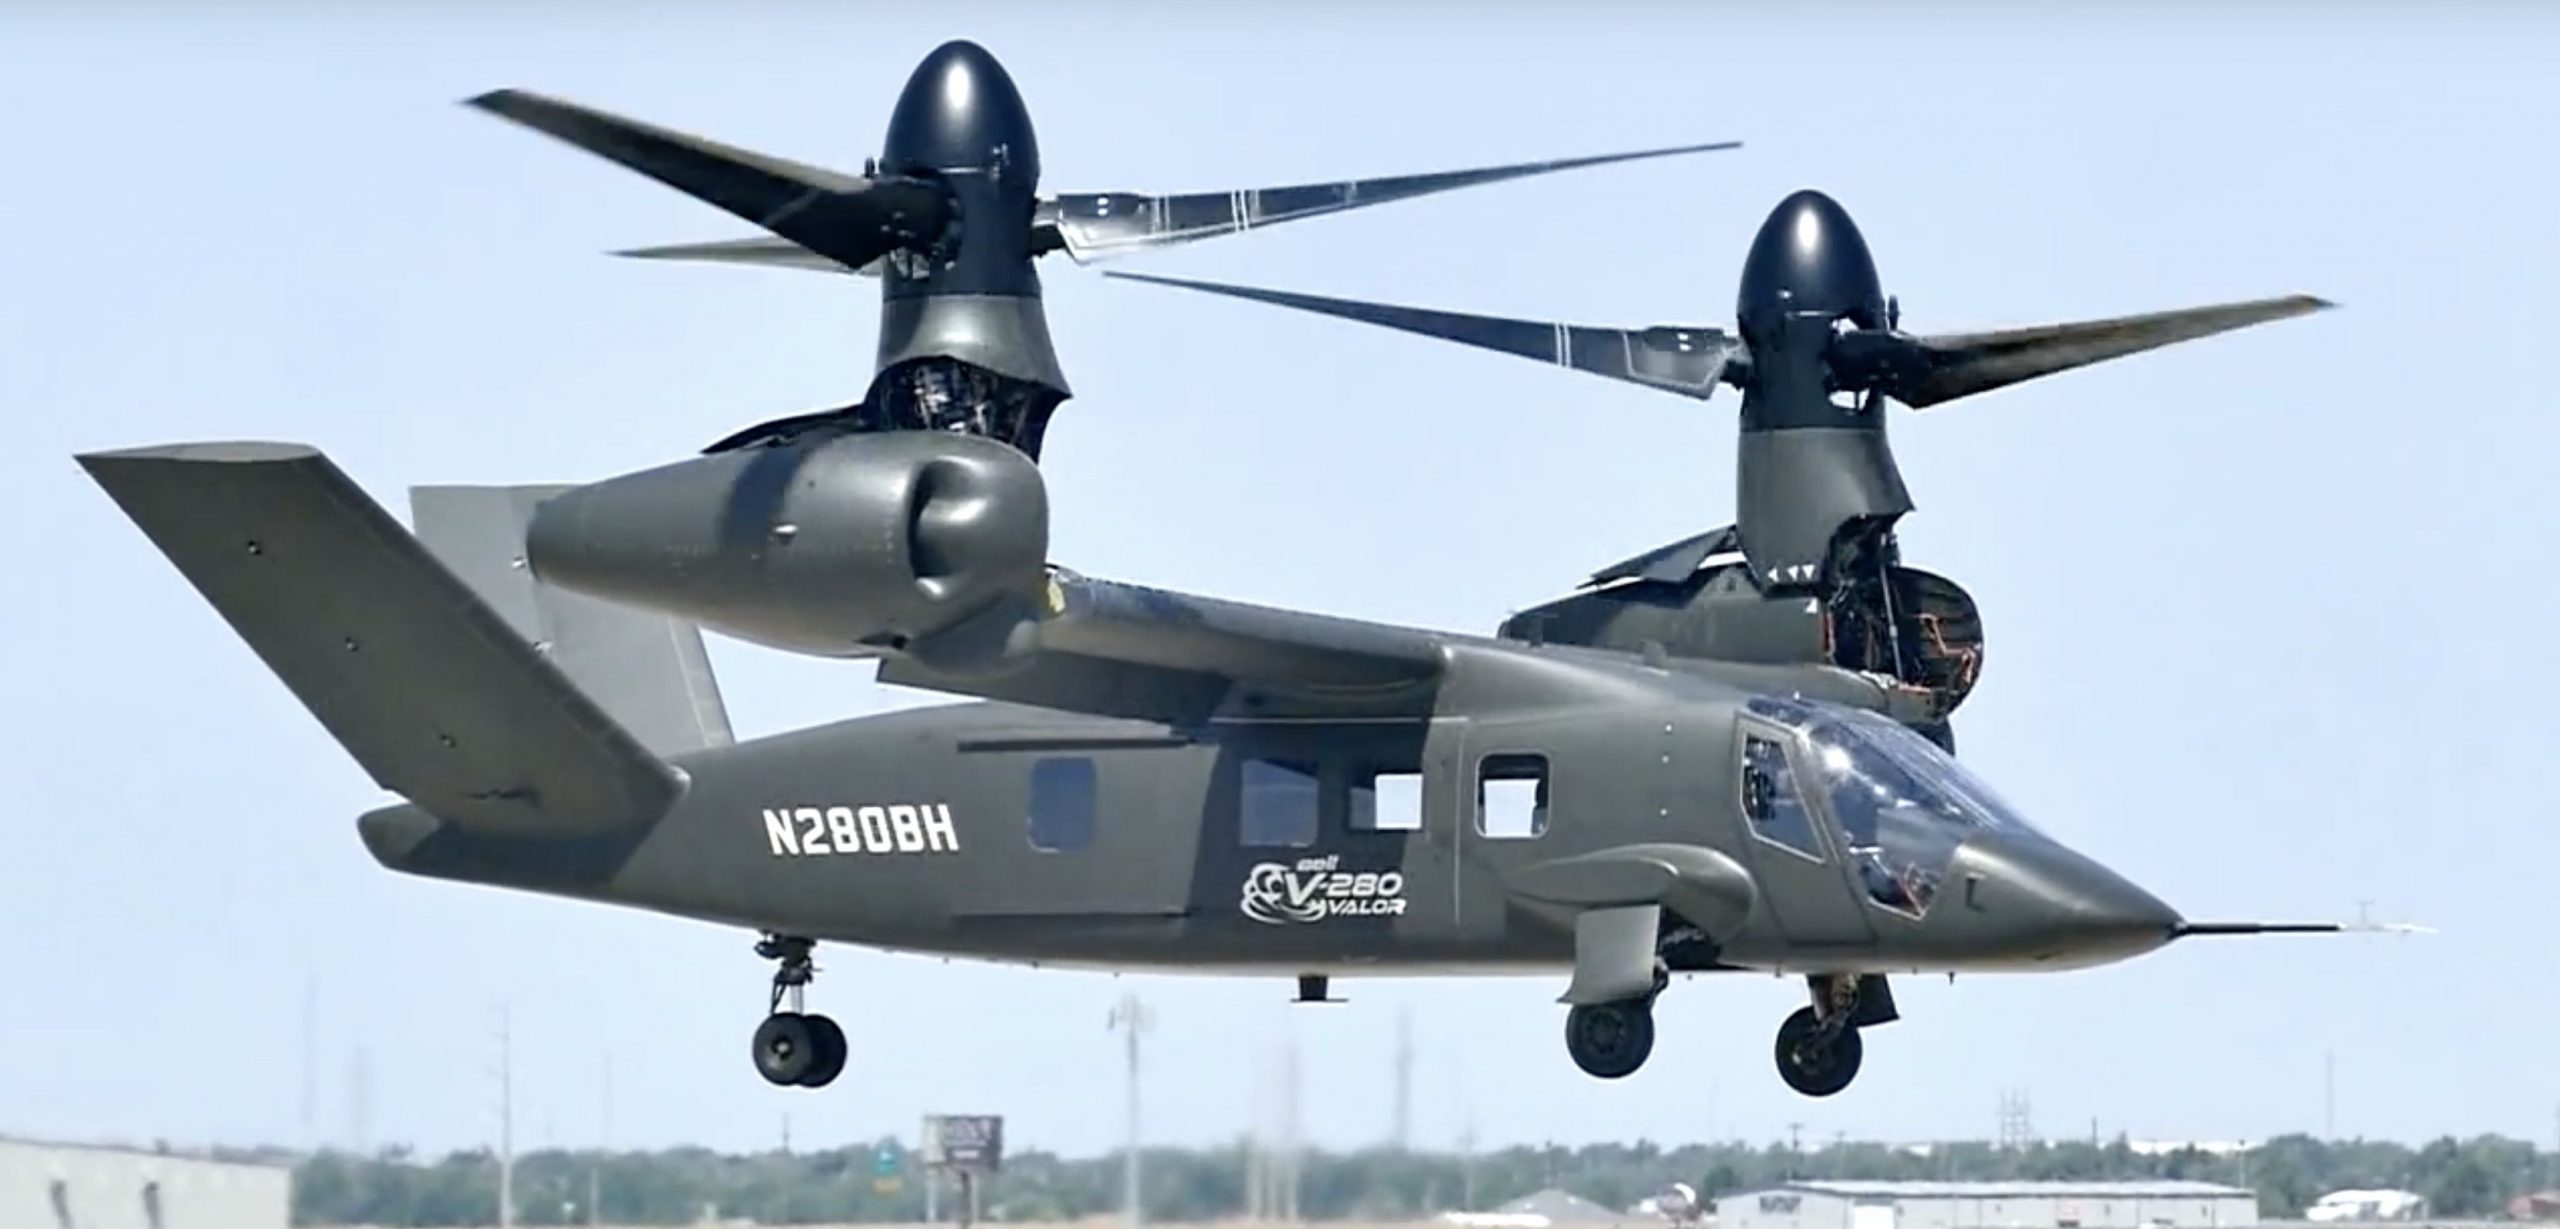 In the US, a brand-new VTOL helicopter has been unveiled.